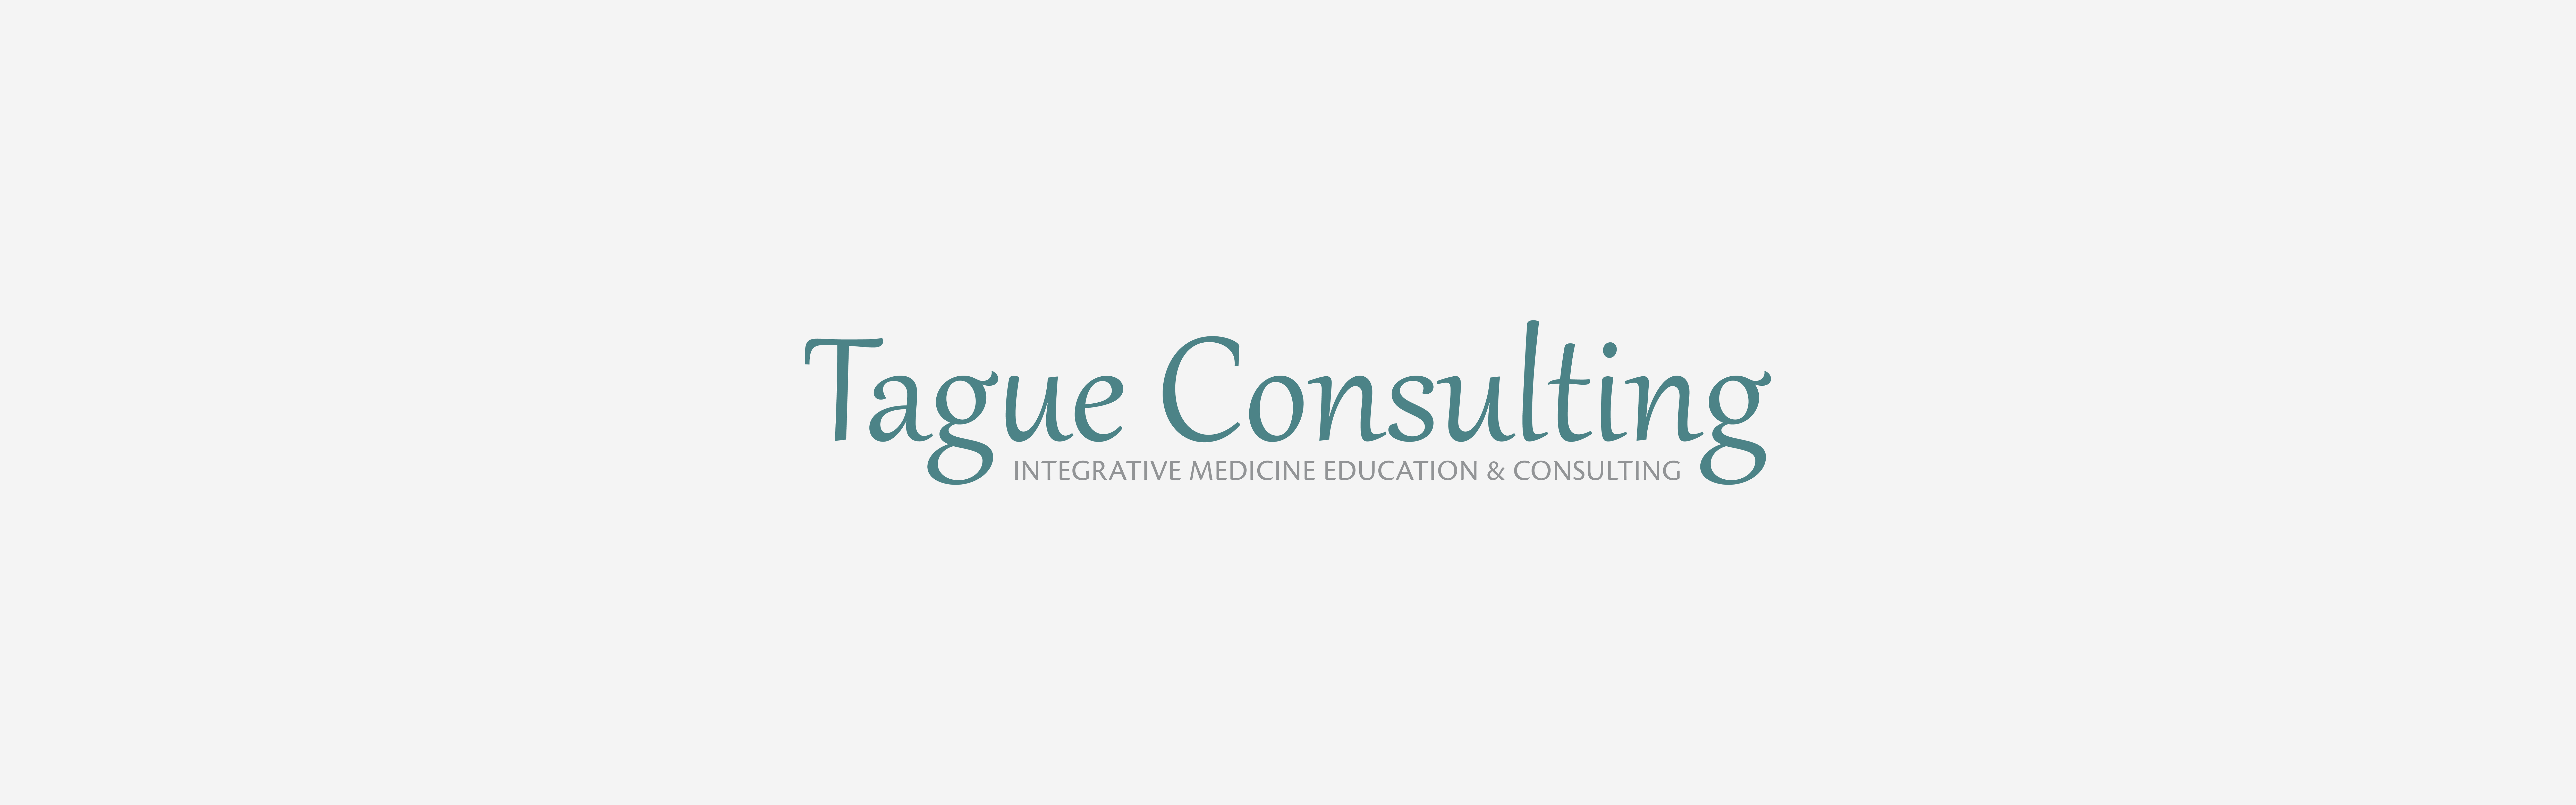 The image displays a logo for "Tague Consulting," which specializes in integrative medicine education and consulting, as indicated by the tagline beneath the company name. The text is in a serif font.